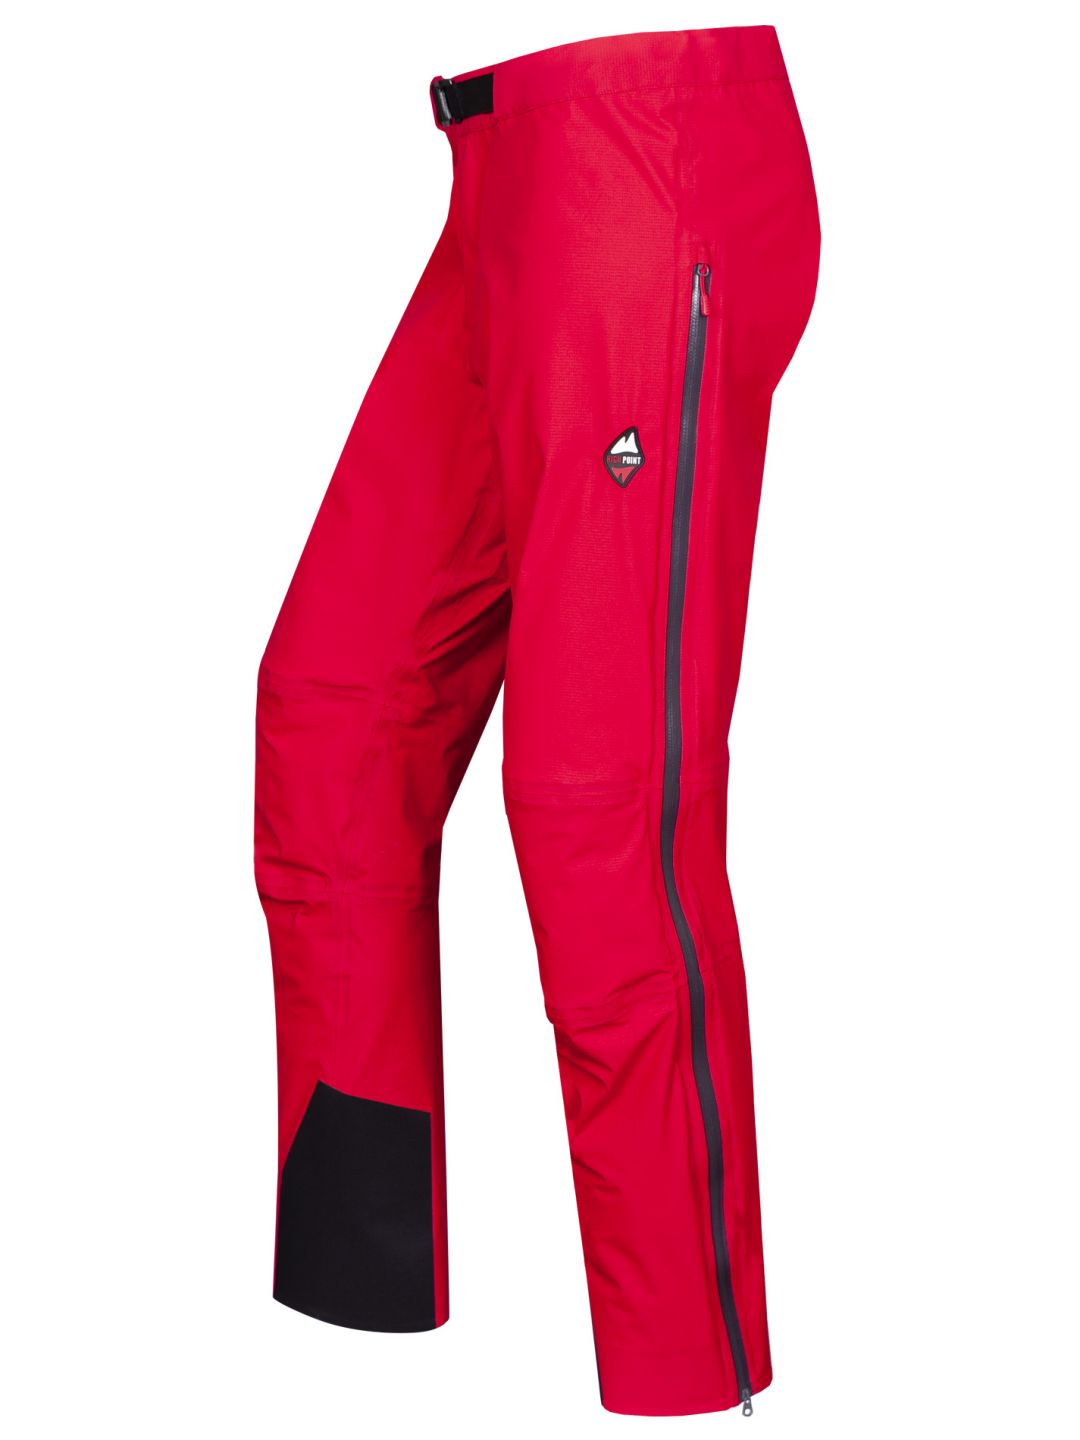 HIGH POINT CLIFF pants red varianta: L